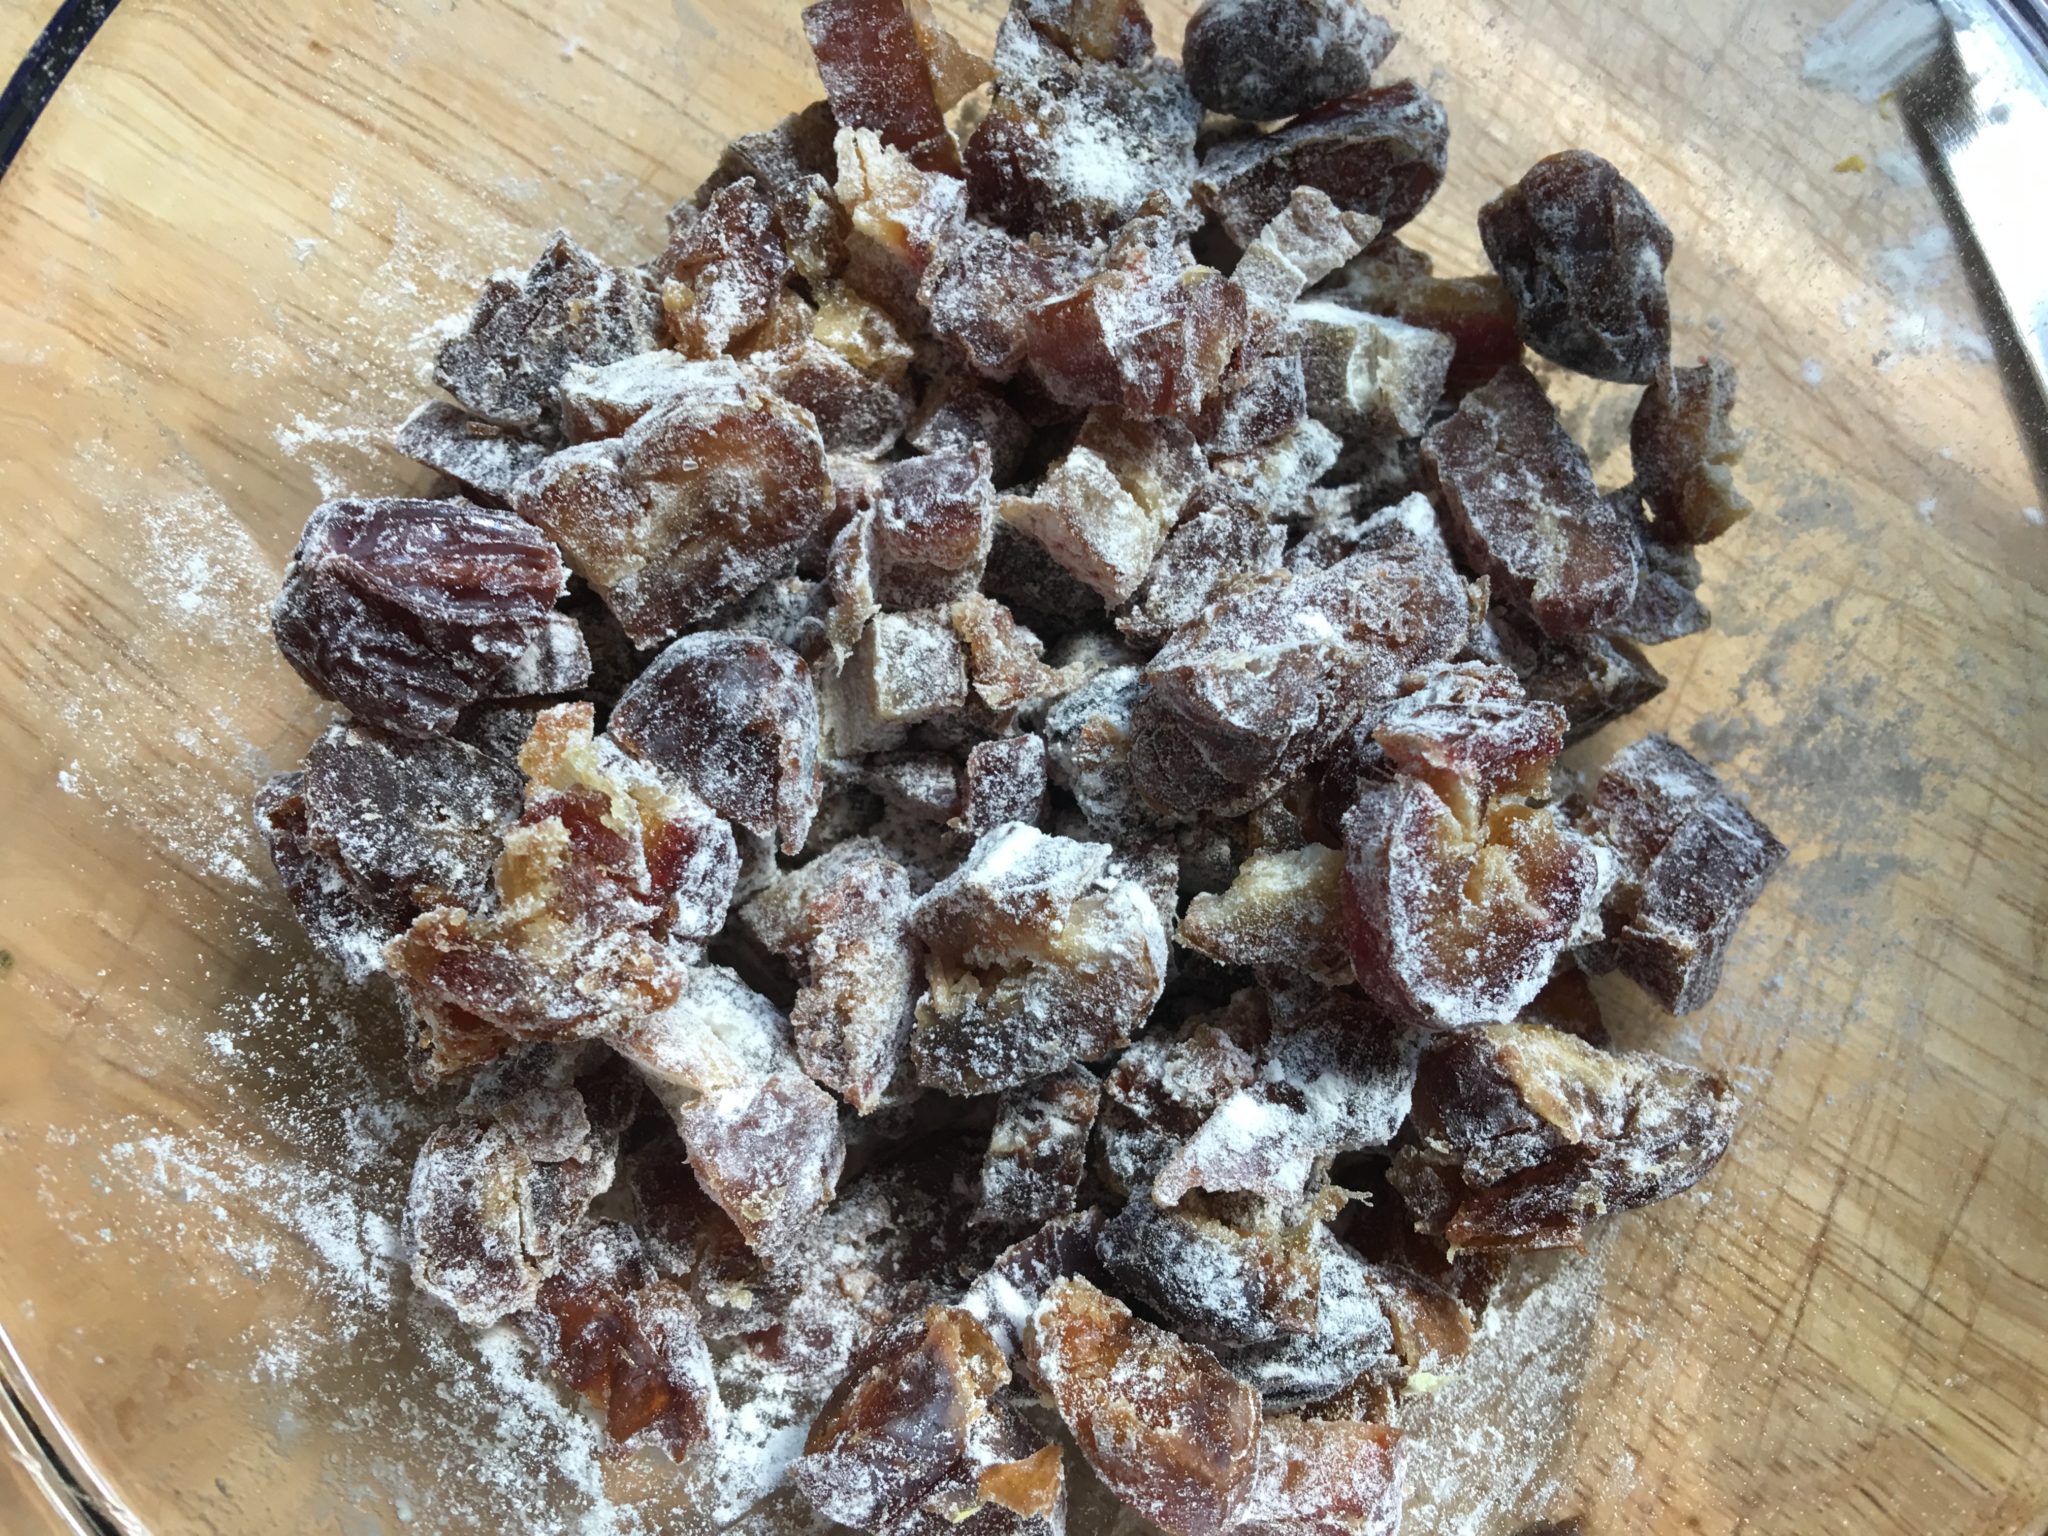 A glass bowl of dates tossed in flour